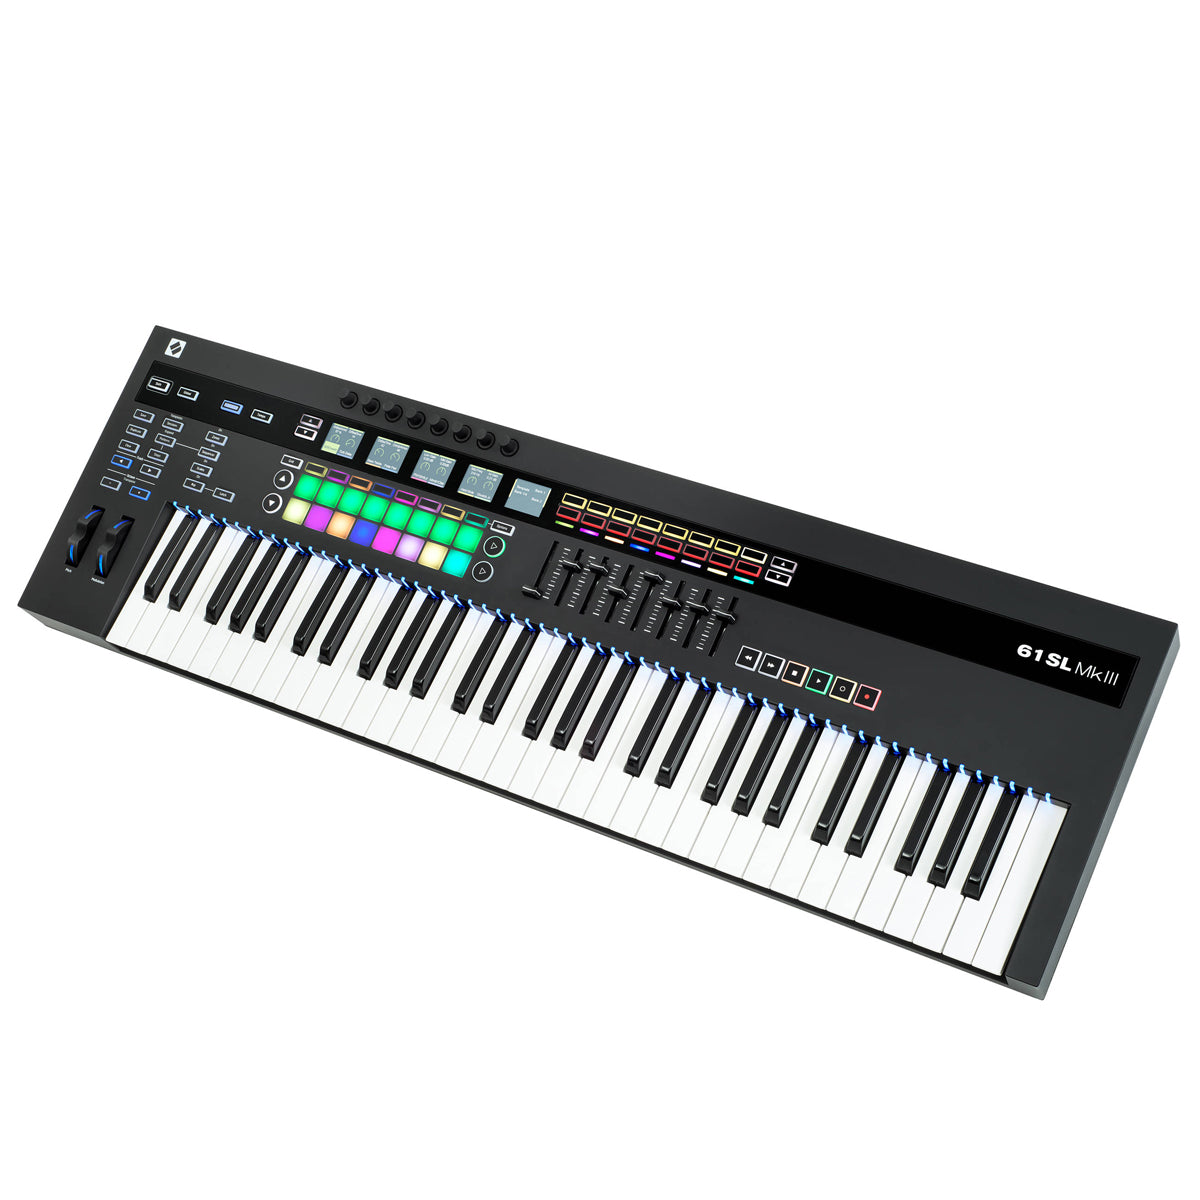 Novation 61SL MkIII Keyboard Controller with Sequencer